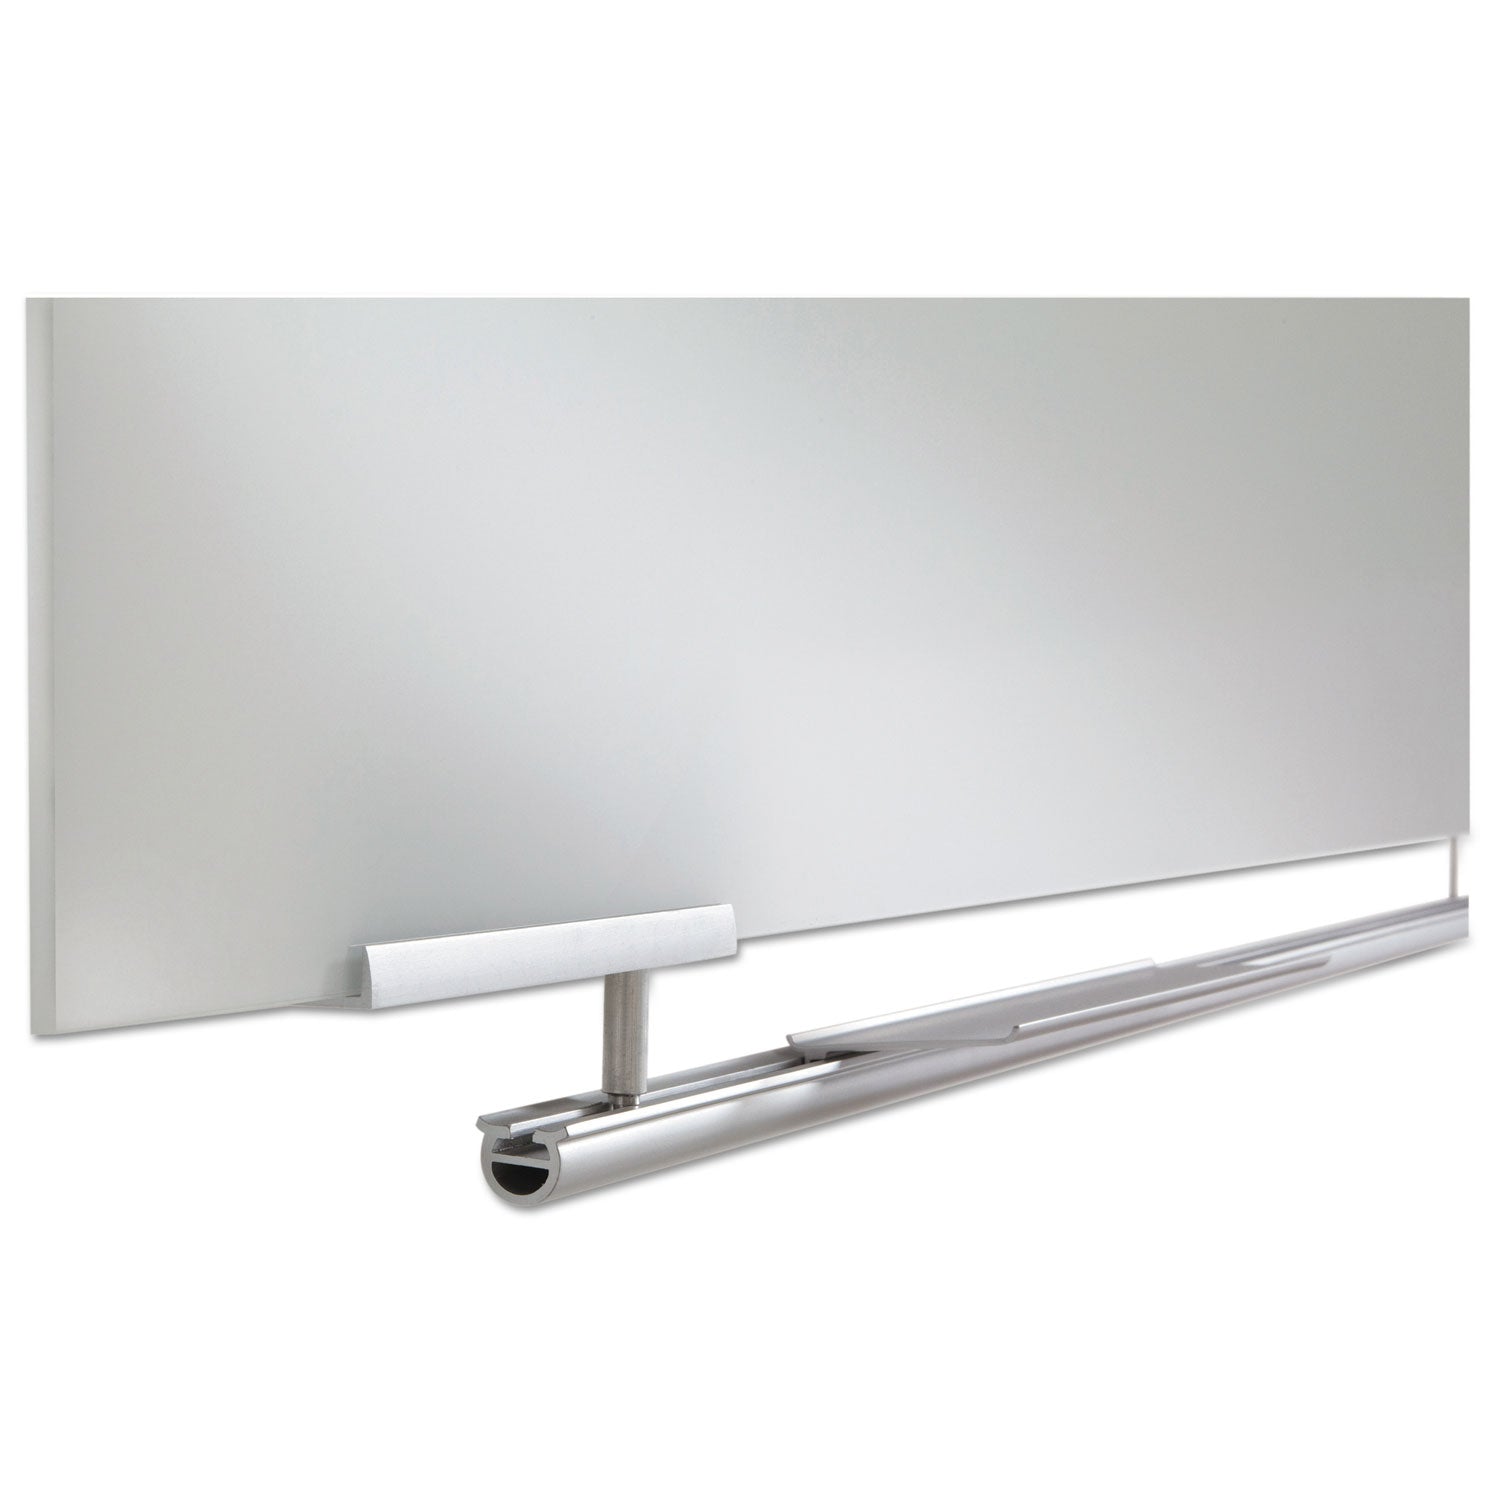 Clarity Glass Dry Erase Board with Aluminum Trim, 72 x 36, White Surface - 